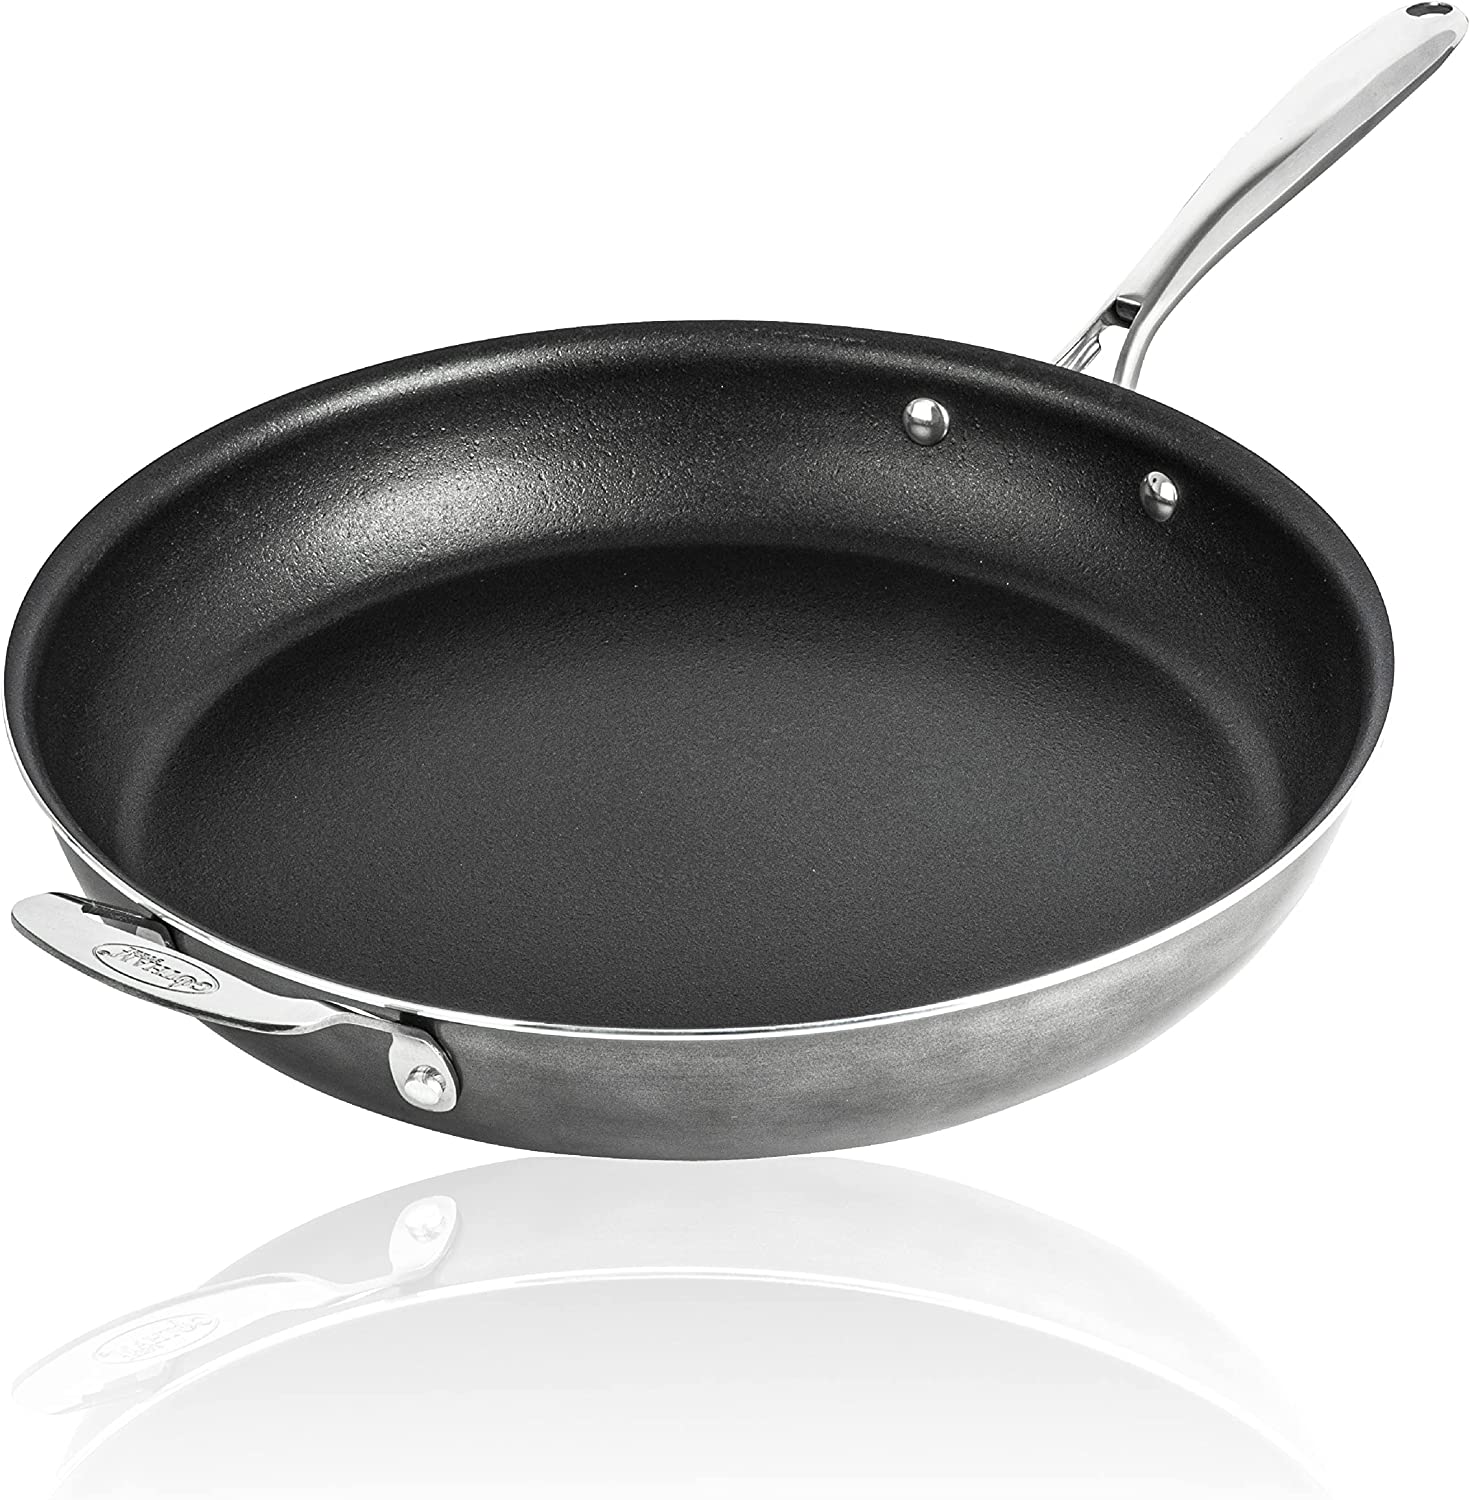 My JEETEE Nonstick Cookware Set Review : r/CheapCookware